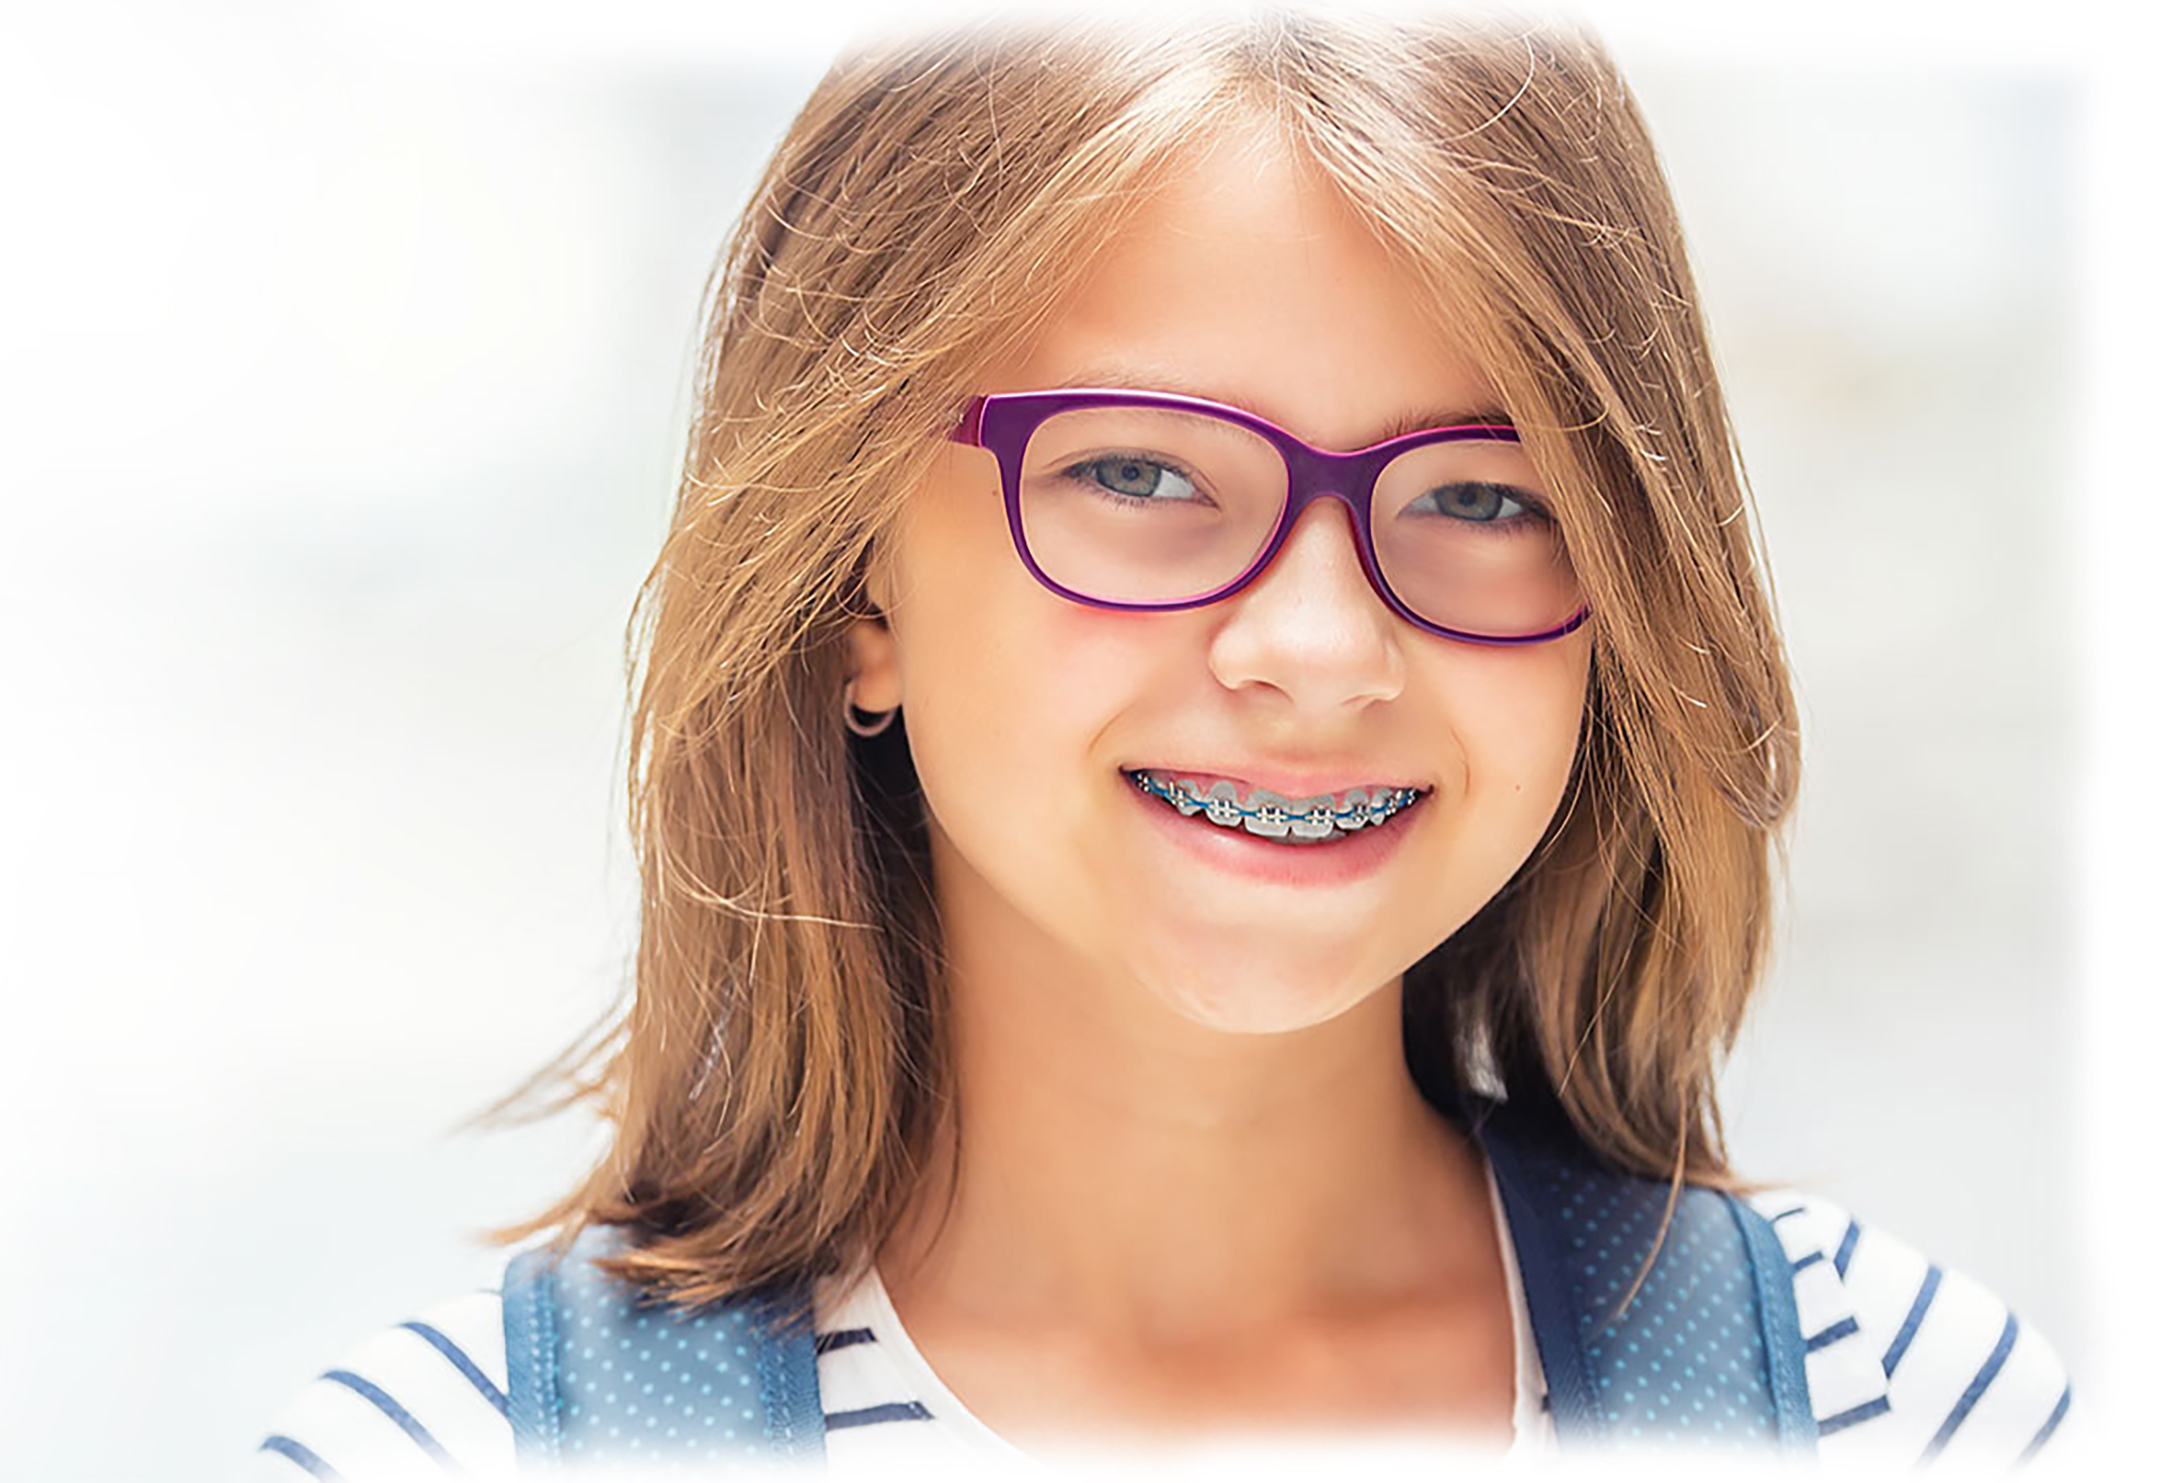 Girl with glasses and braces smiling